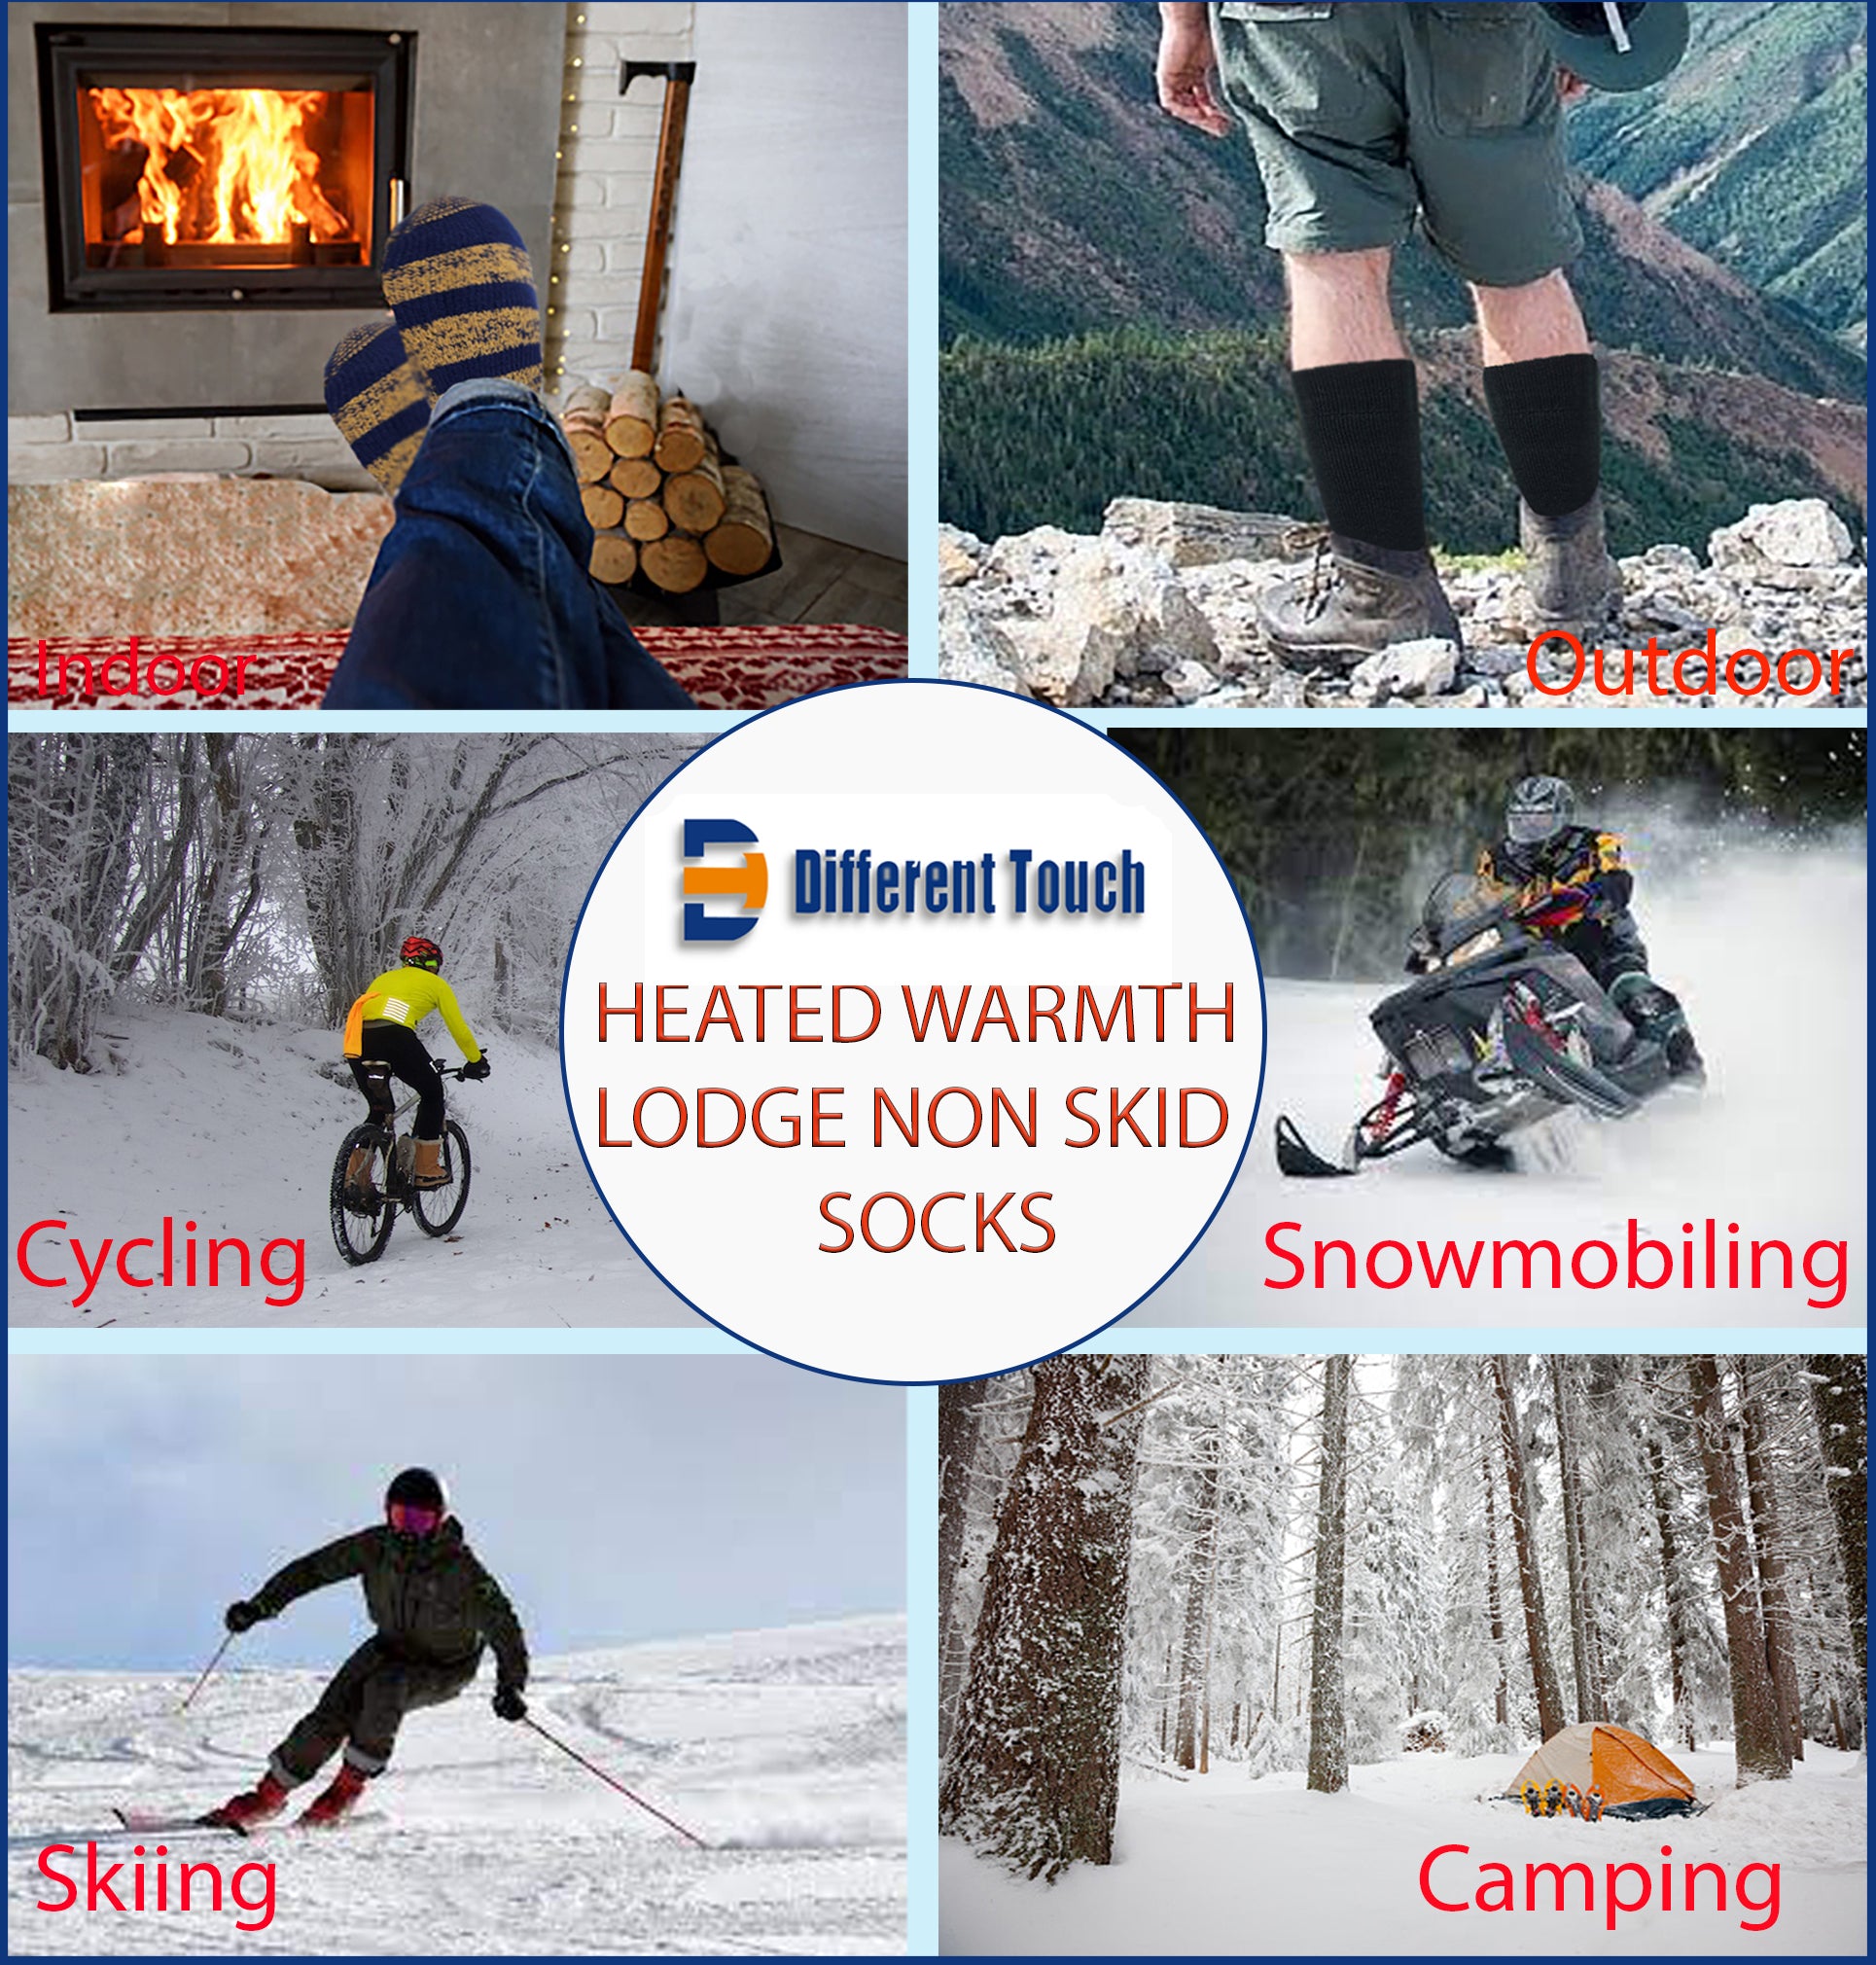 Different Touch Heated Warmth Lodge Non Skid Socks